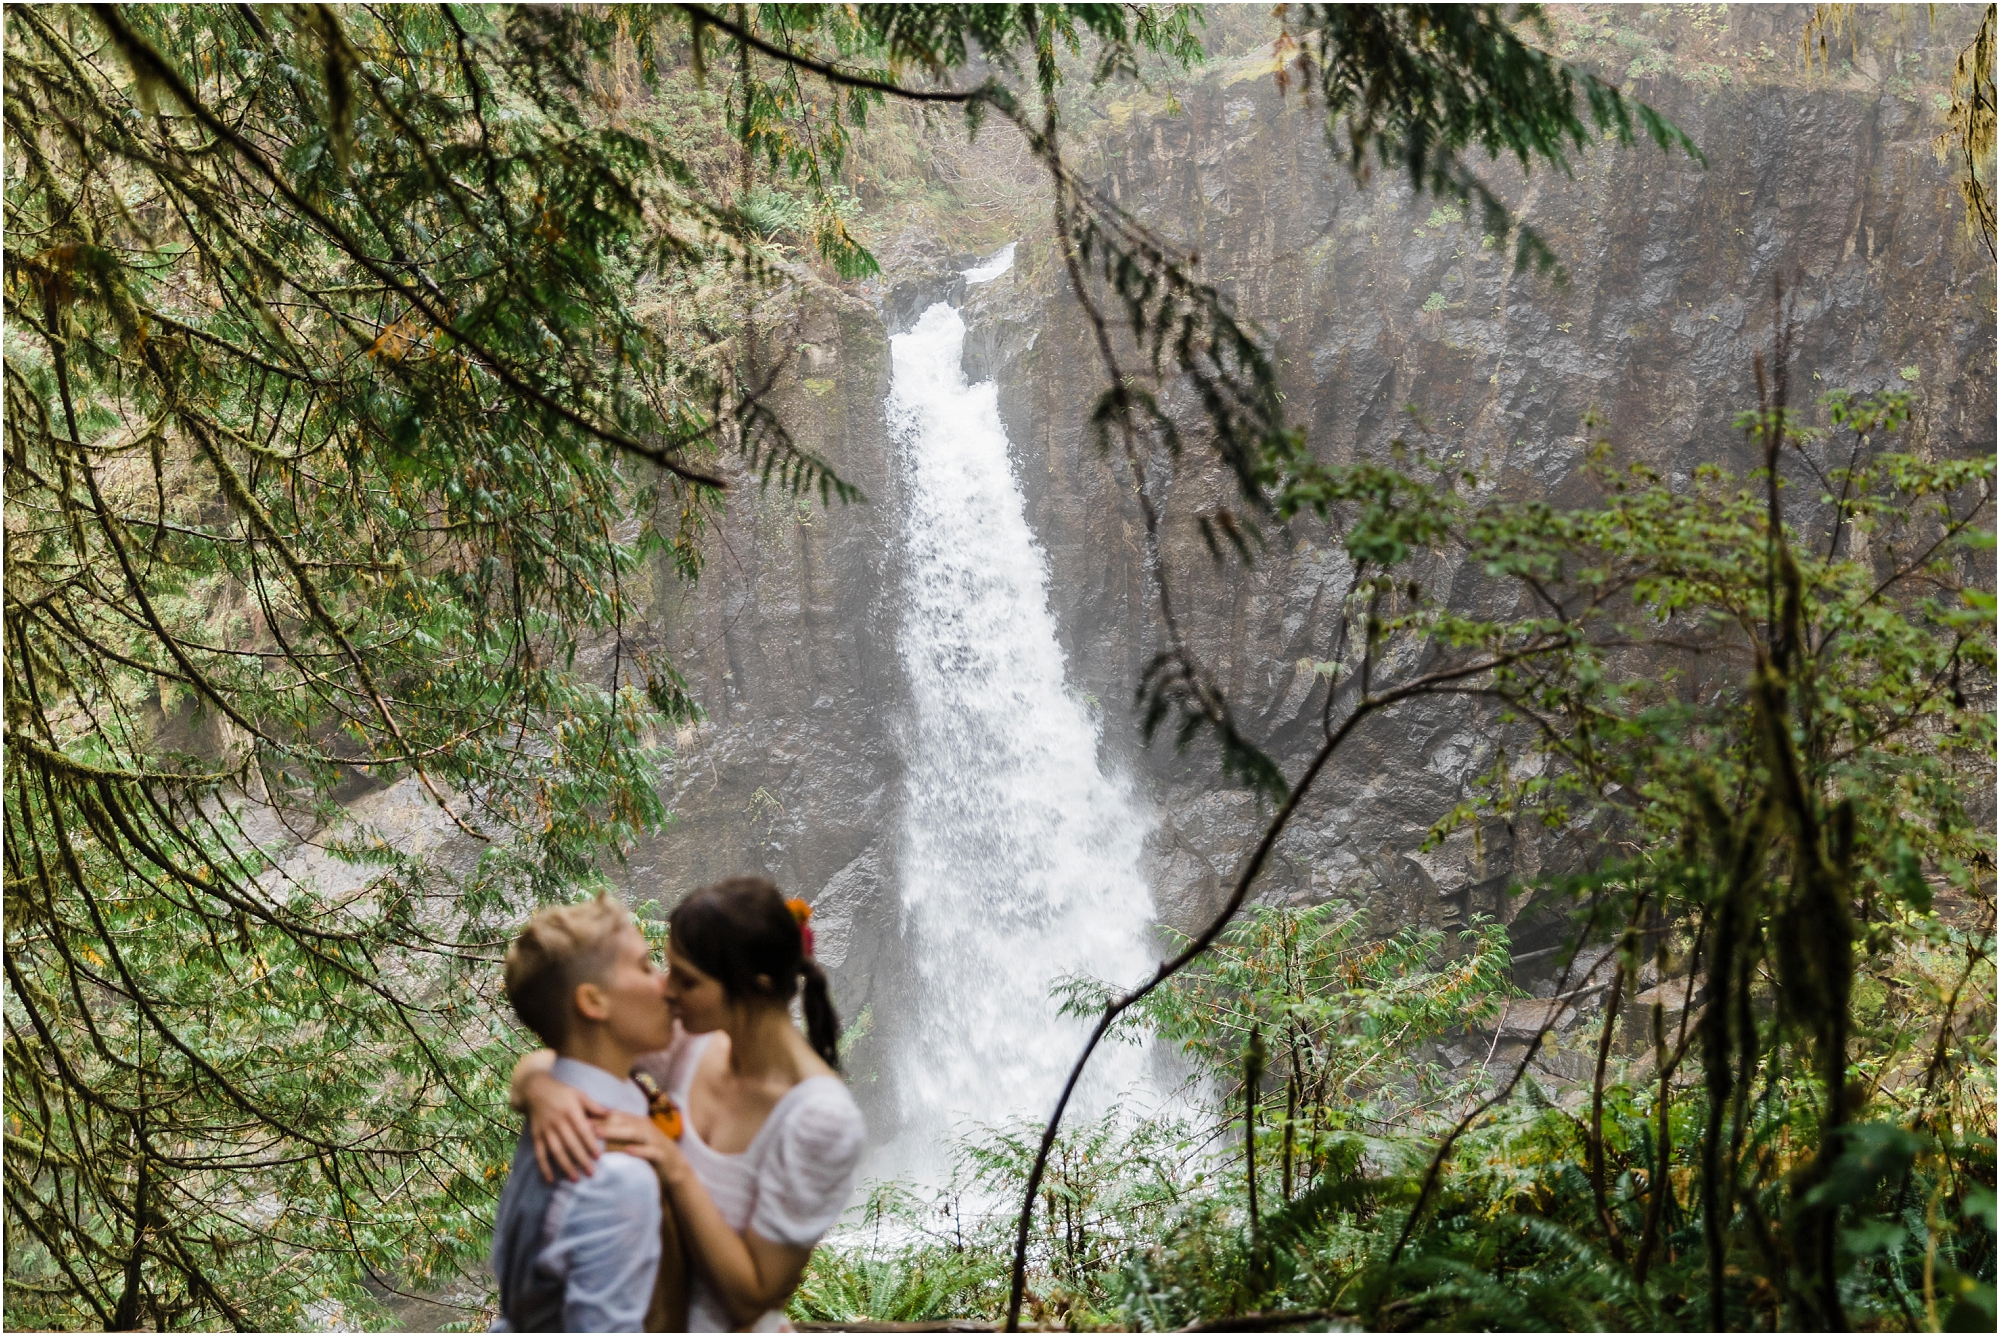 A LGBTQ+ couple kisses in front of Drift Creek falls in Oregon during their PNW hiking adventure elopement. | Erica Swantek Photography